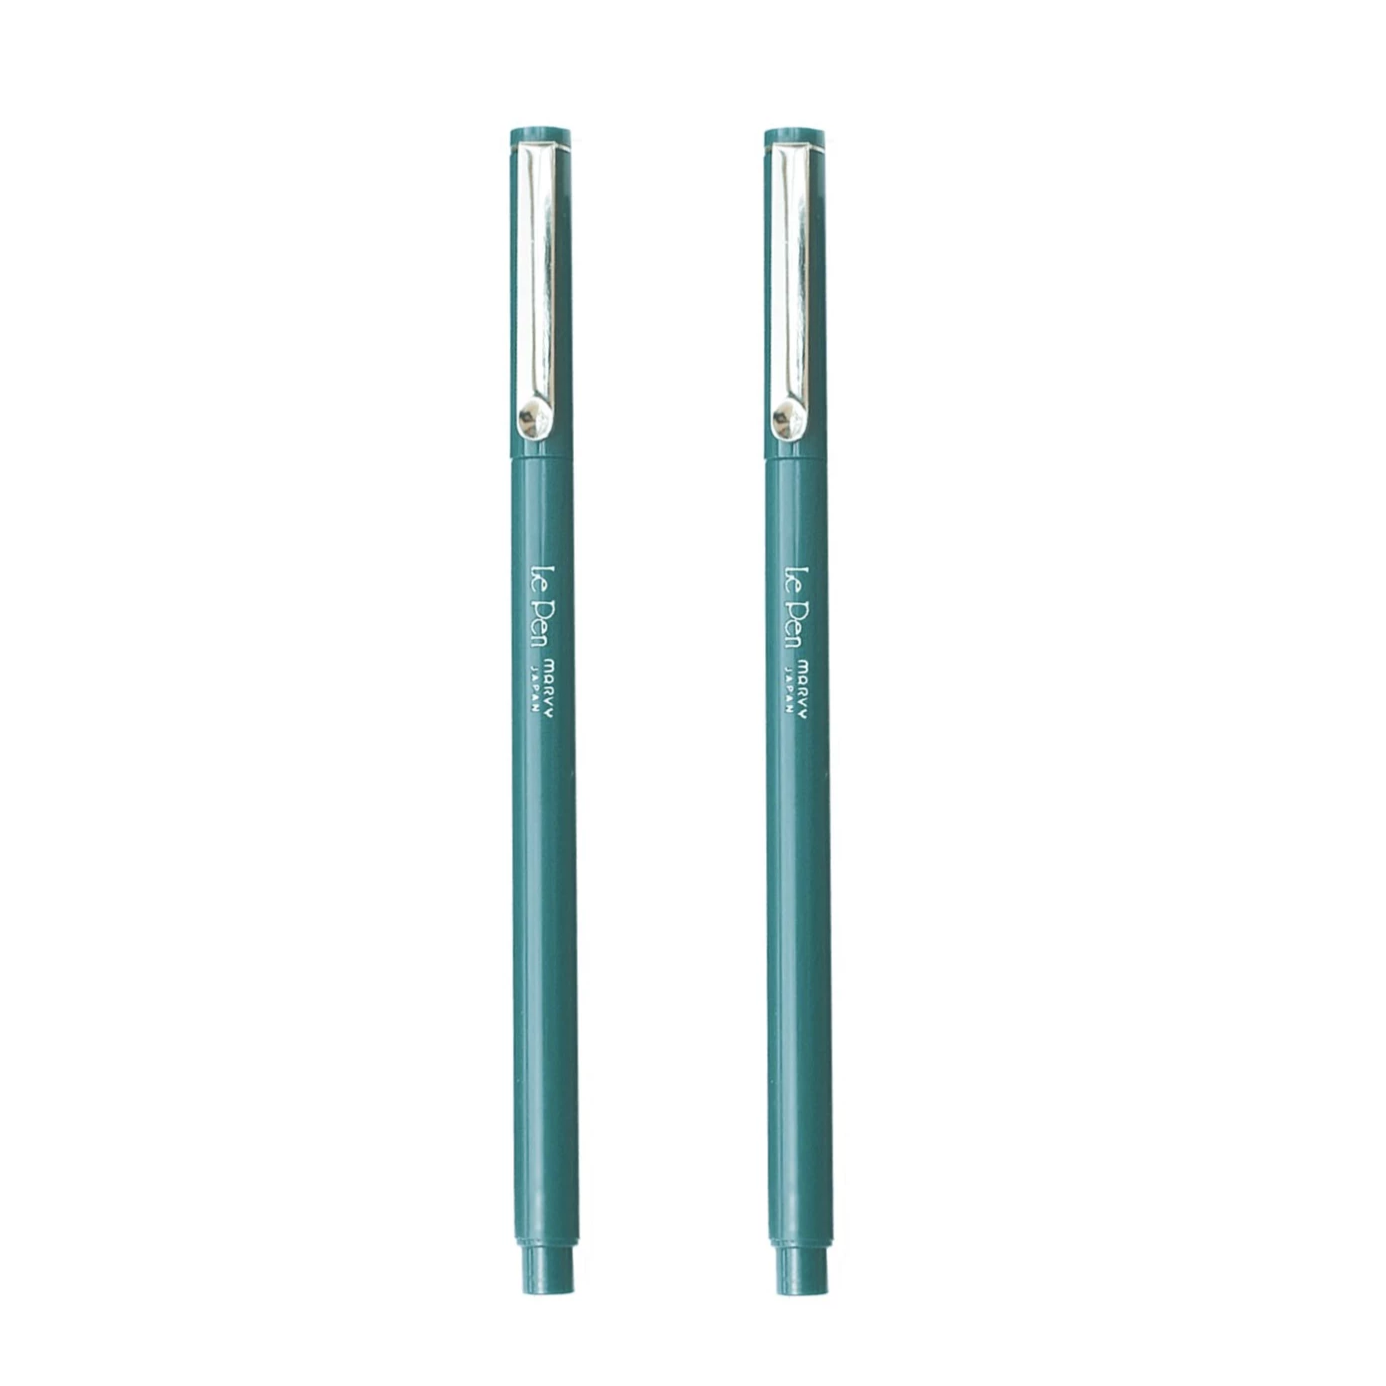 Two teal blue pens.